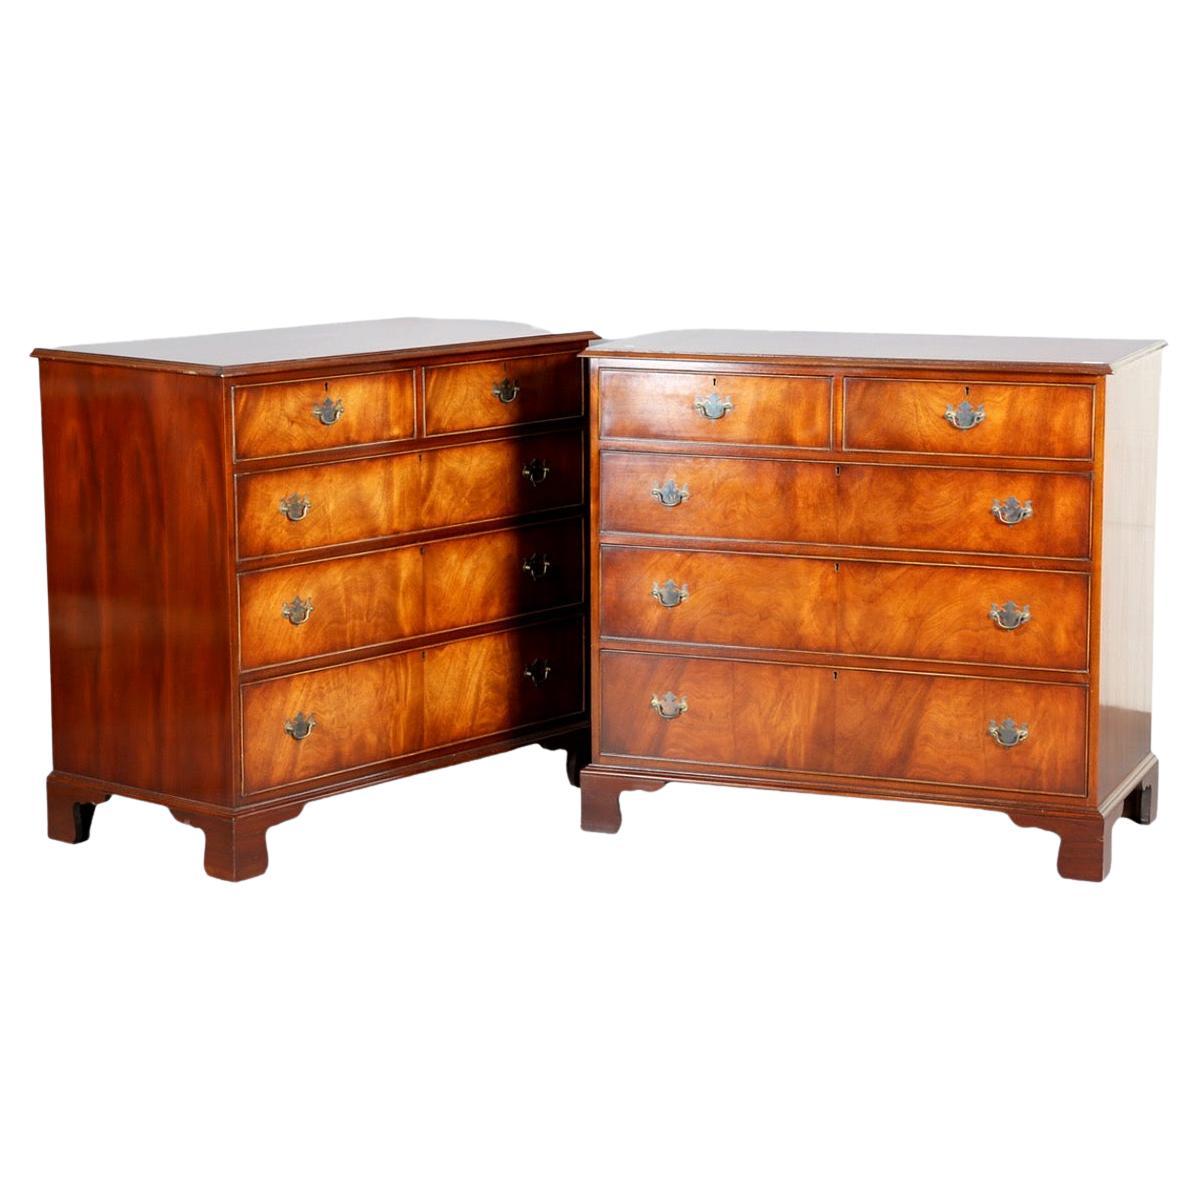 George III Style  Chest of Drawers Made by Bevan Funell Reprodu